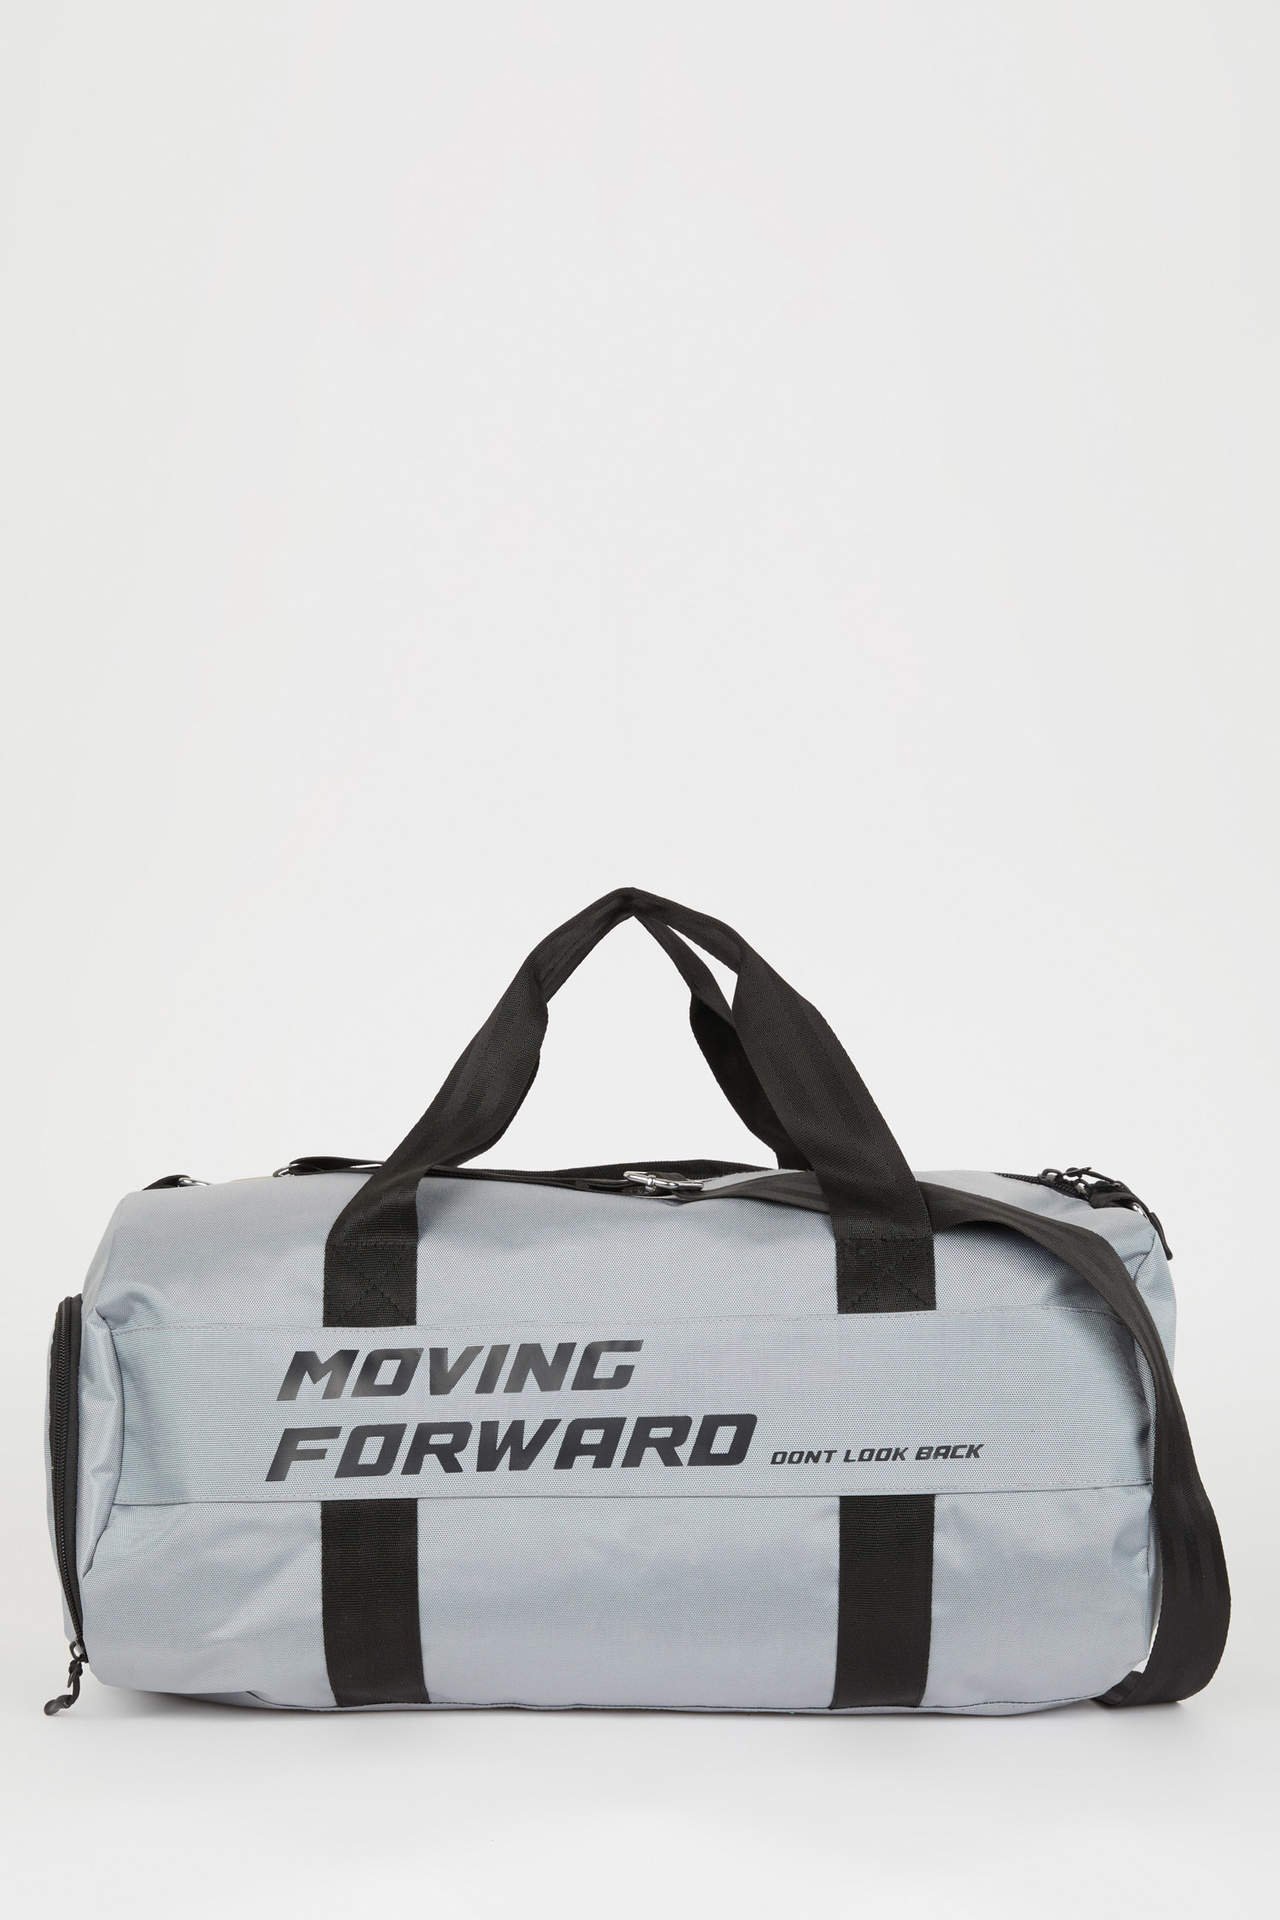 DEFACTO Oxford Sports And Travel Bag